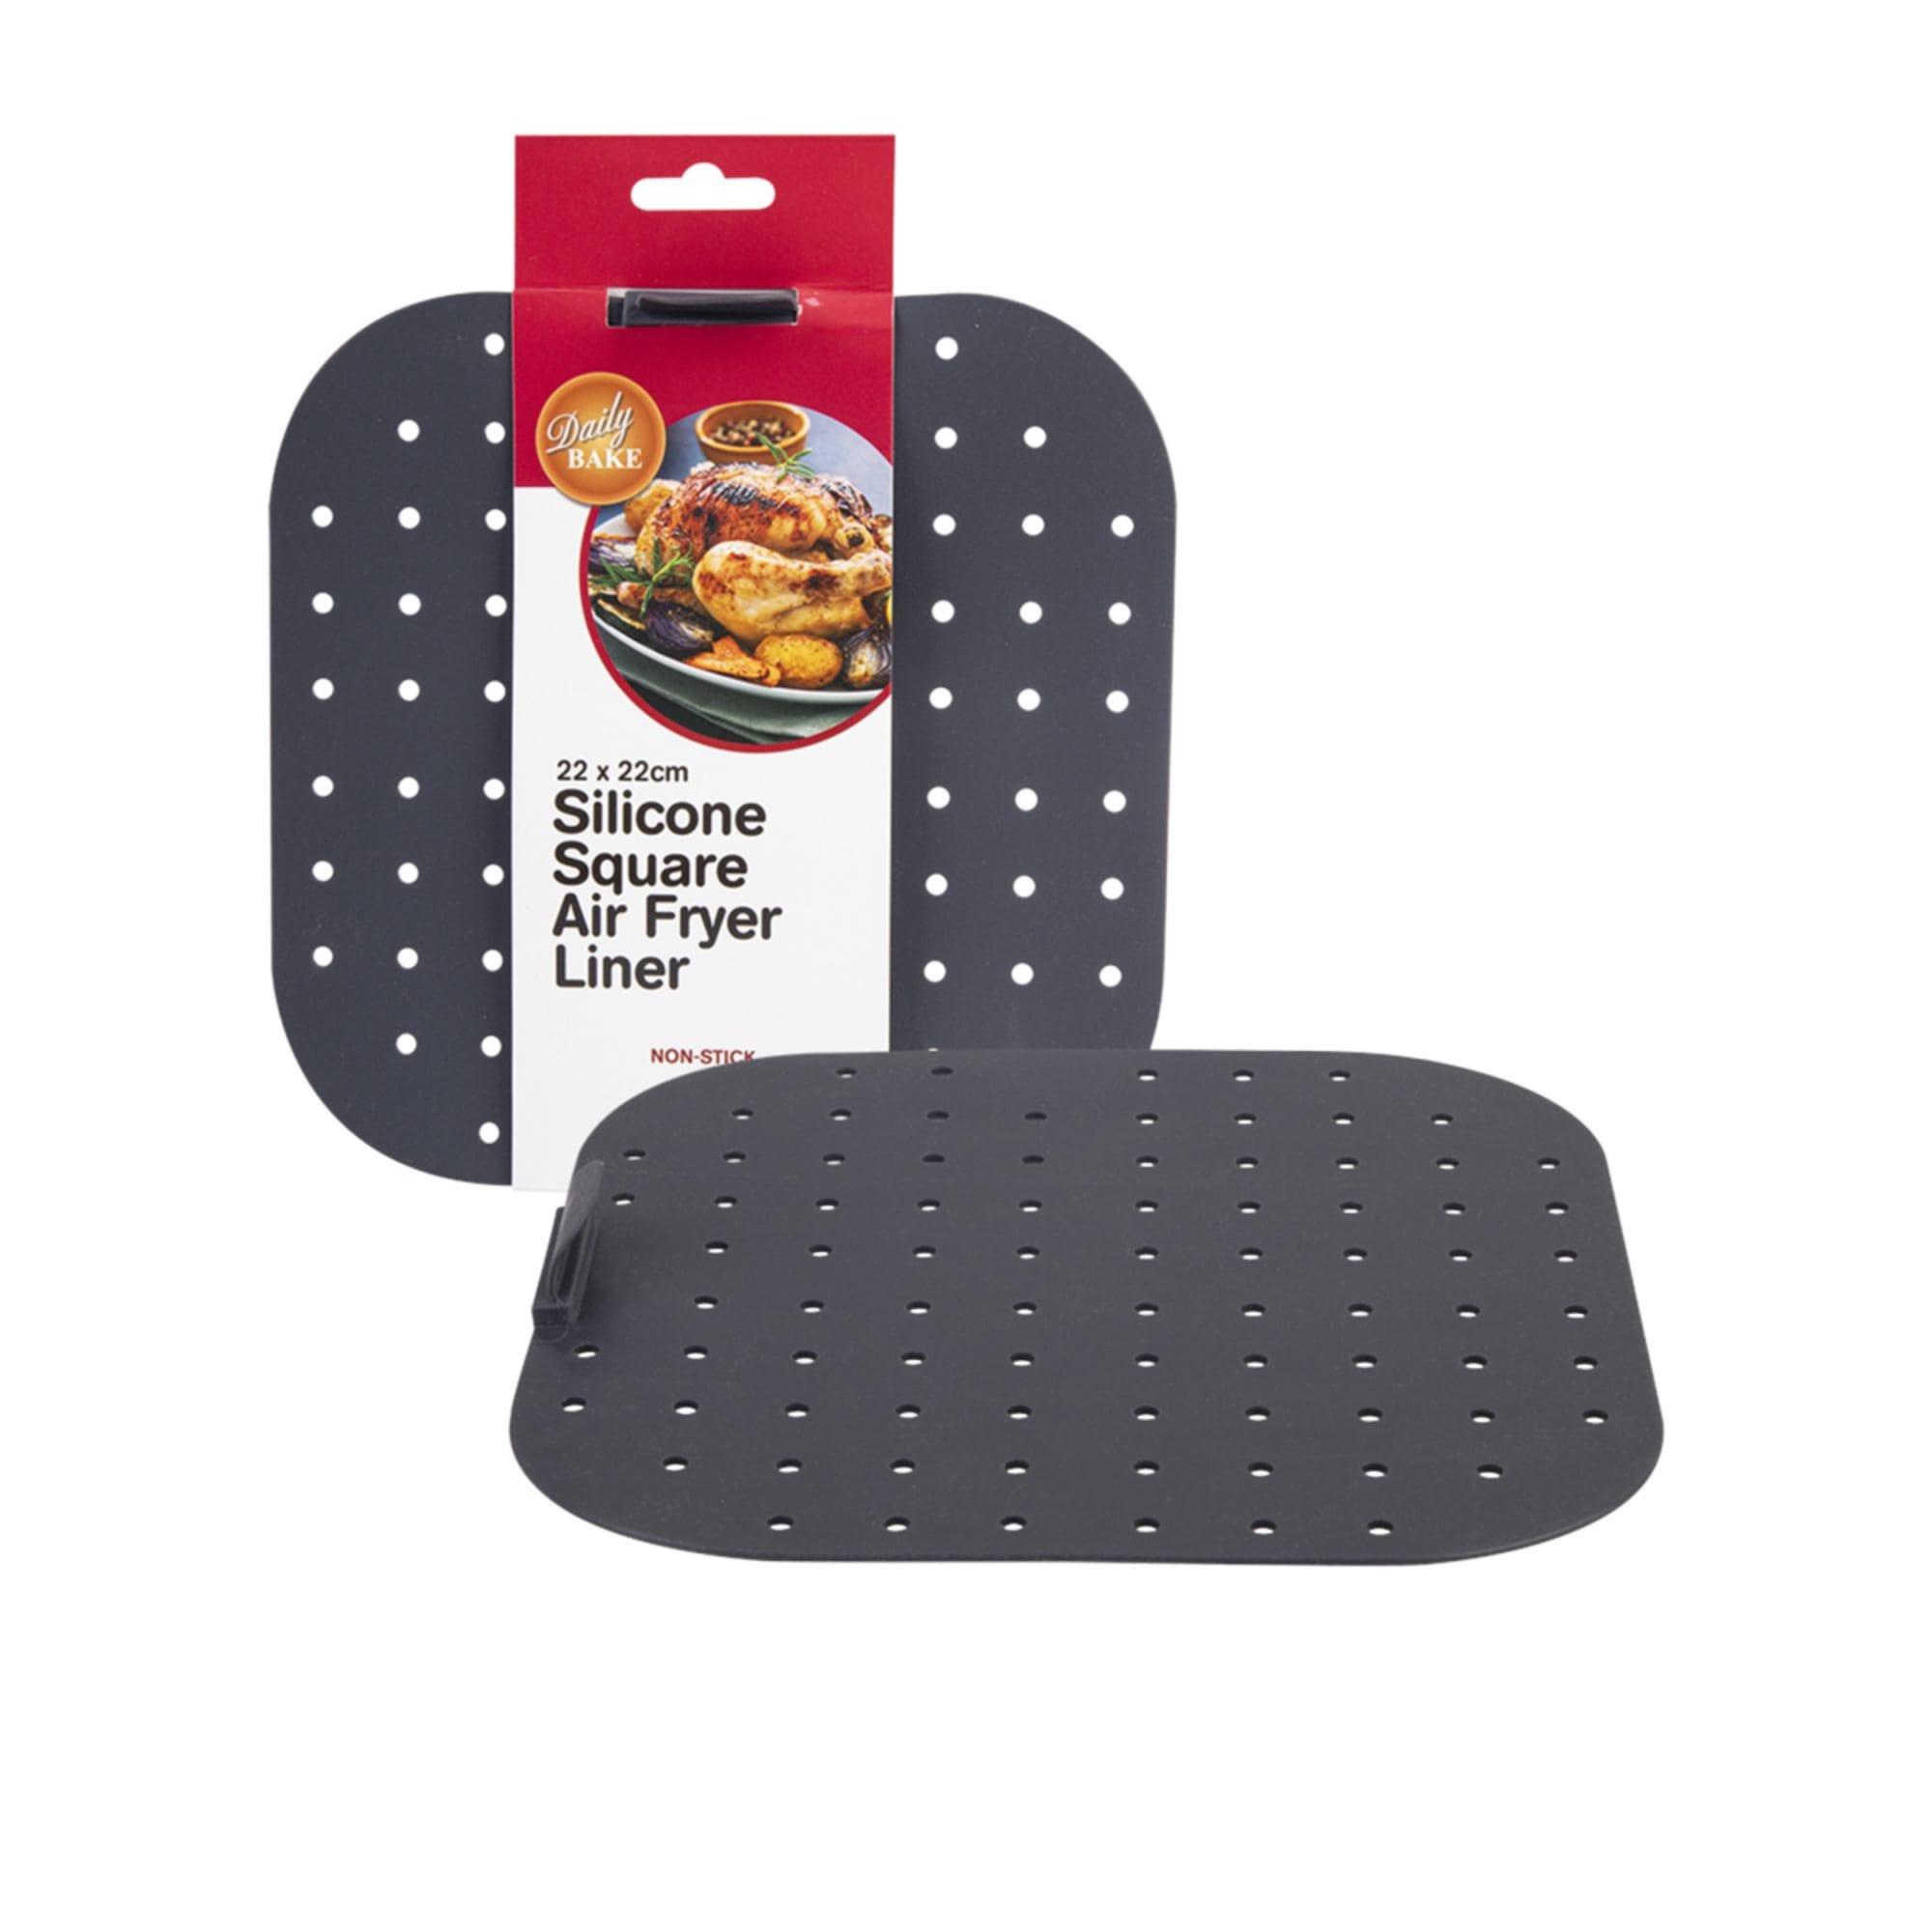 Daily Bake Silicone Square Air Fryer Liner 22cm Image 5